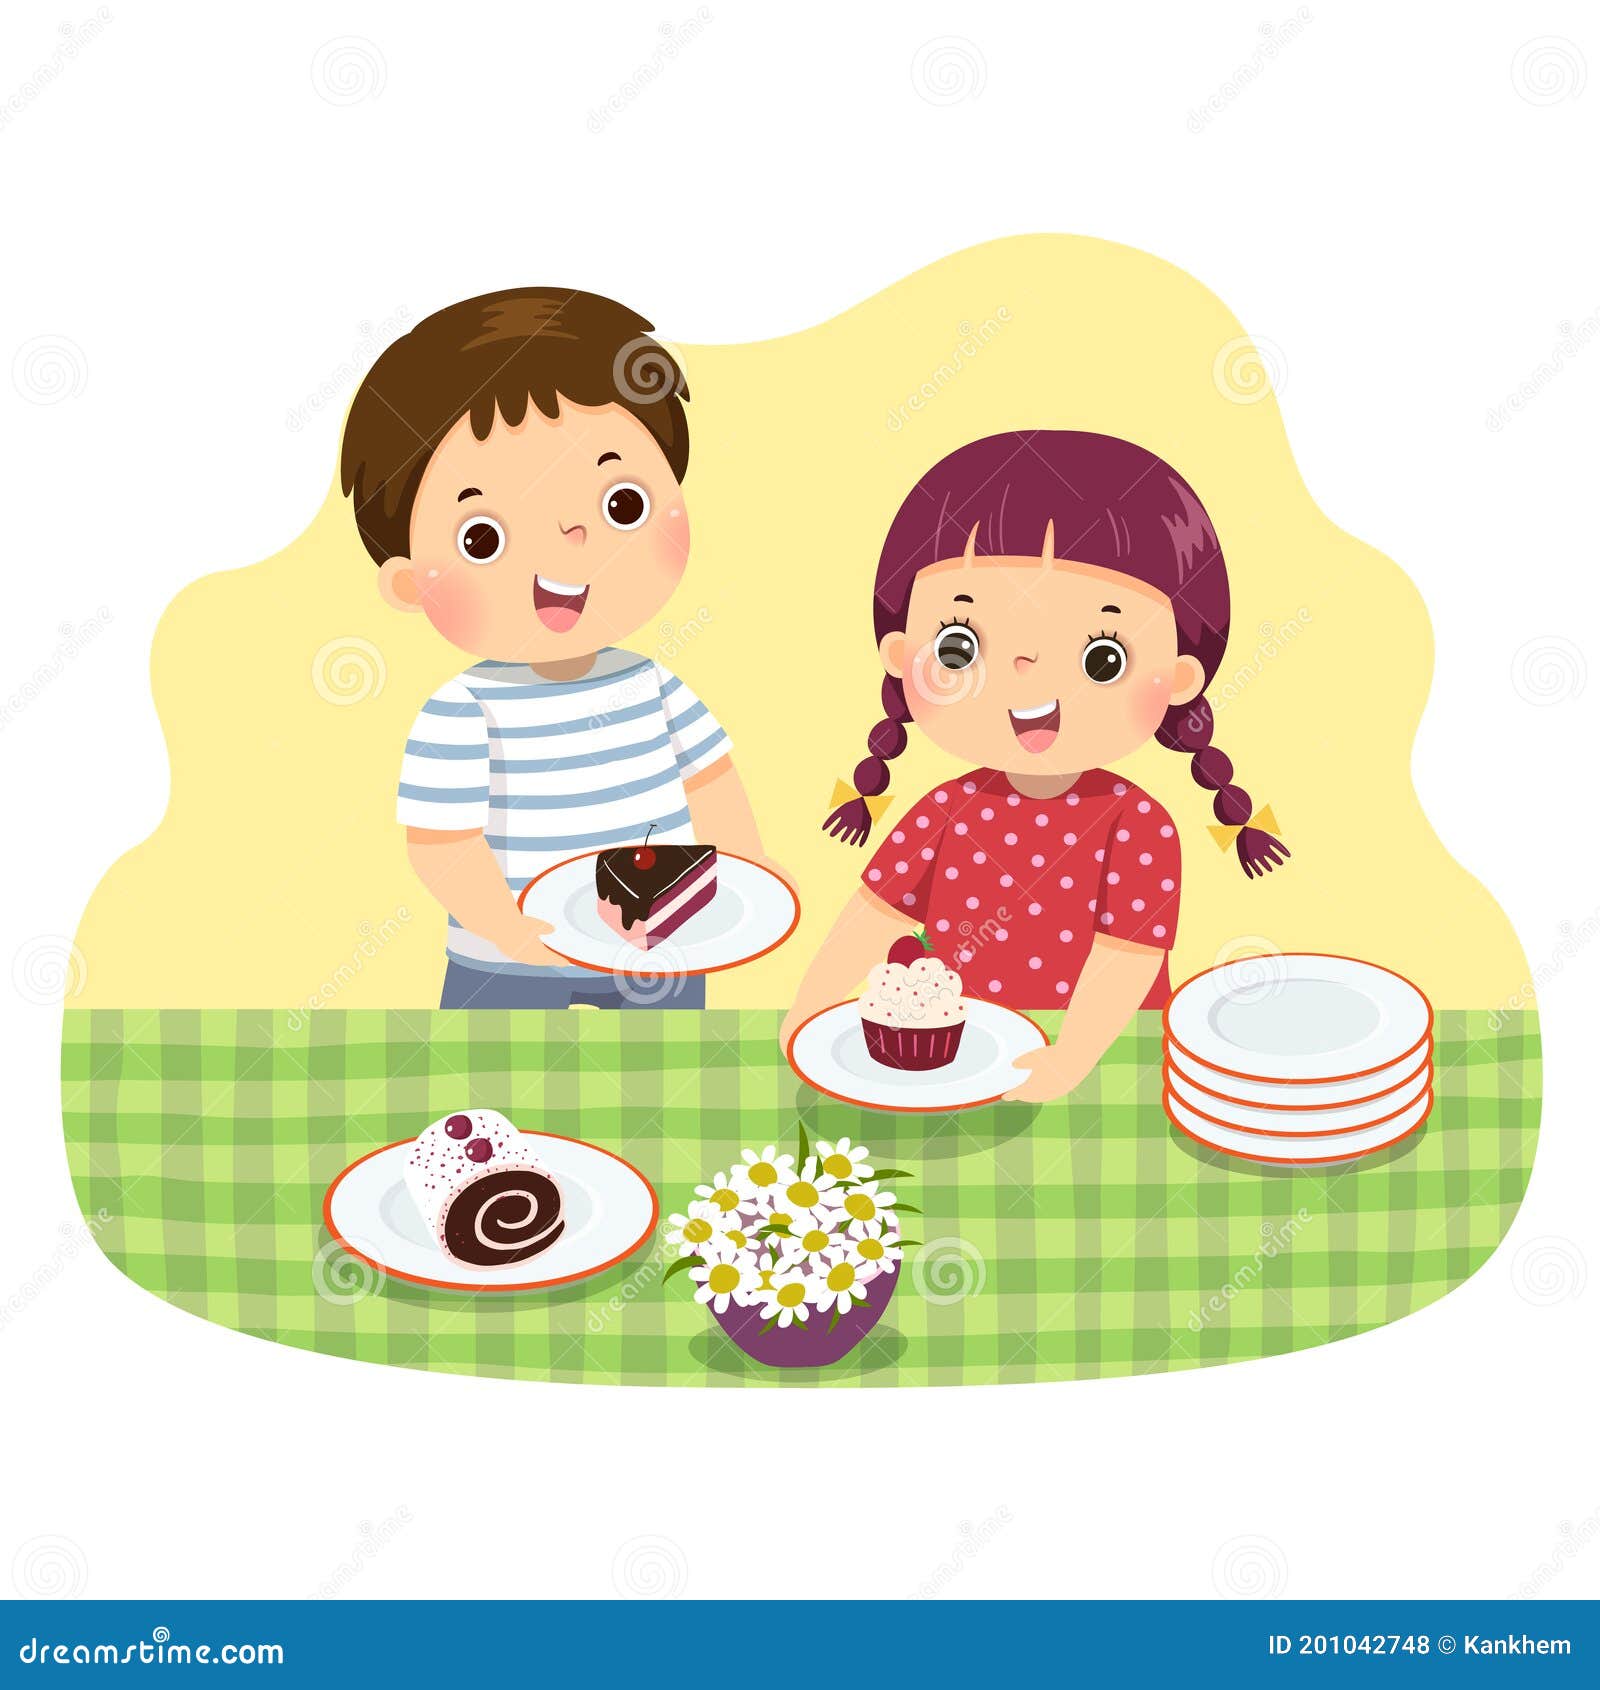 Cartoon of Little Siblings Setting the Table. Kids Doing Housework Chores  at Home Concept Stock Vector - Illustration of household, character:  201042748